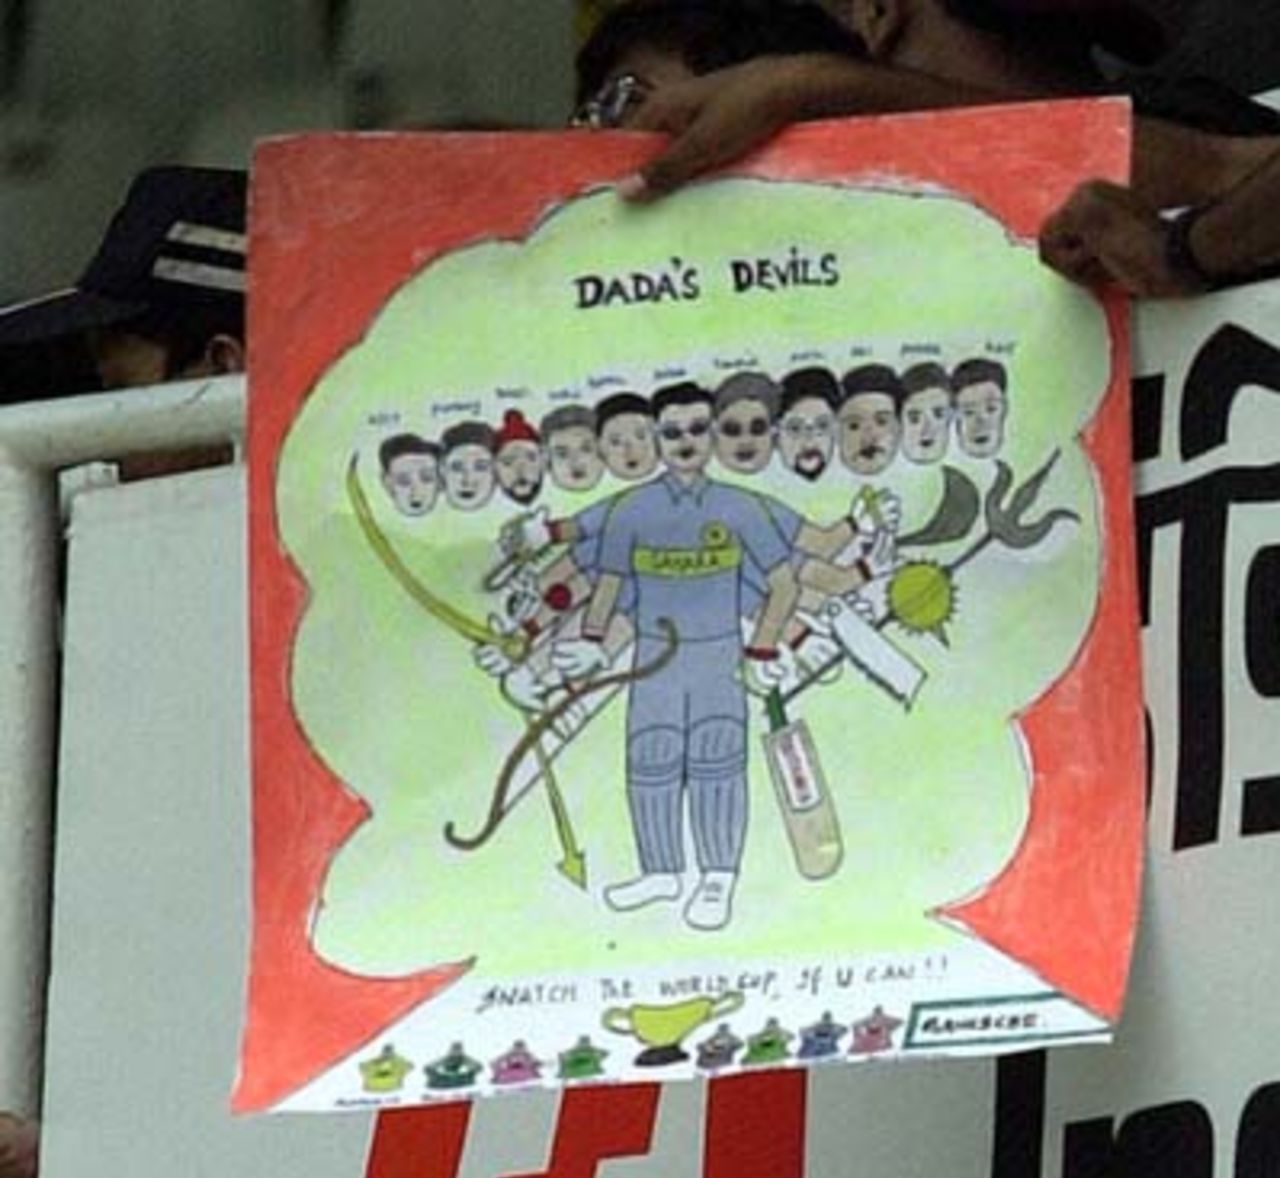 2nd Test: India v West Indies at Chennai, 17-21 October 2002